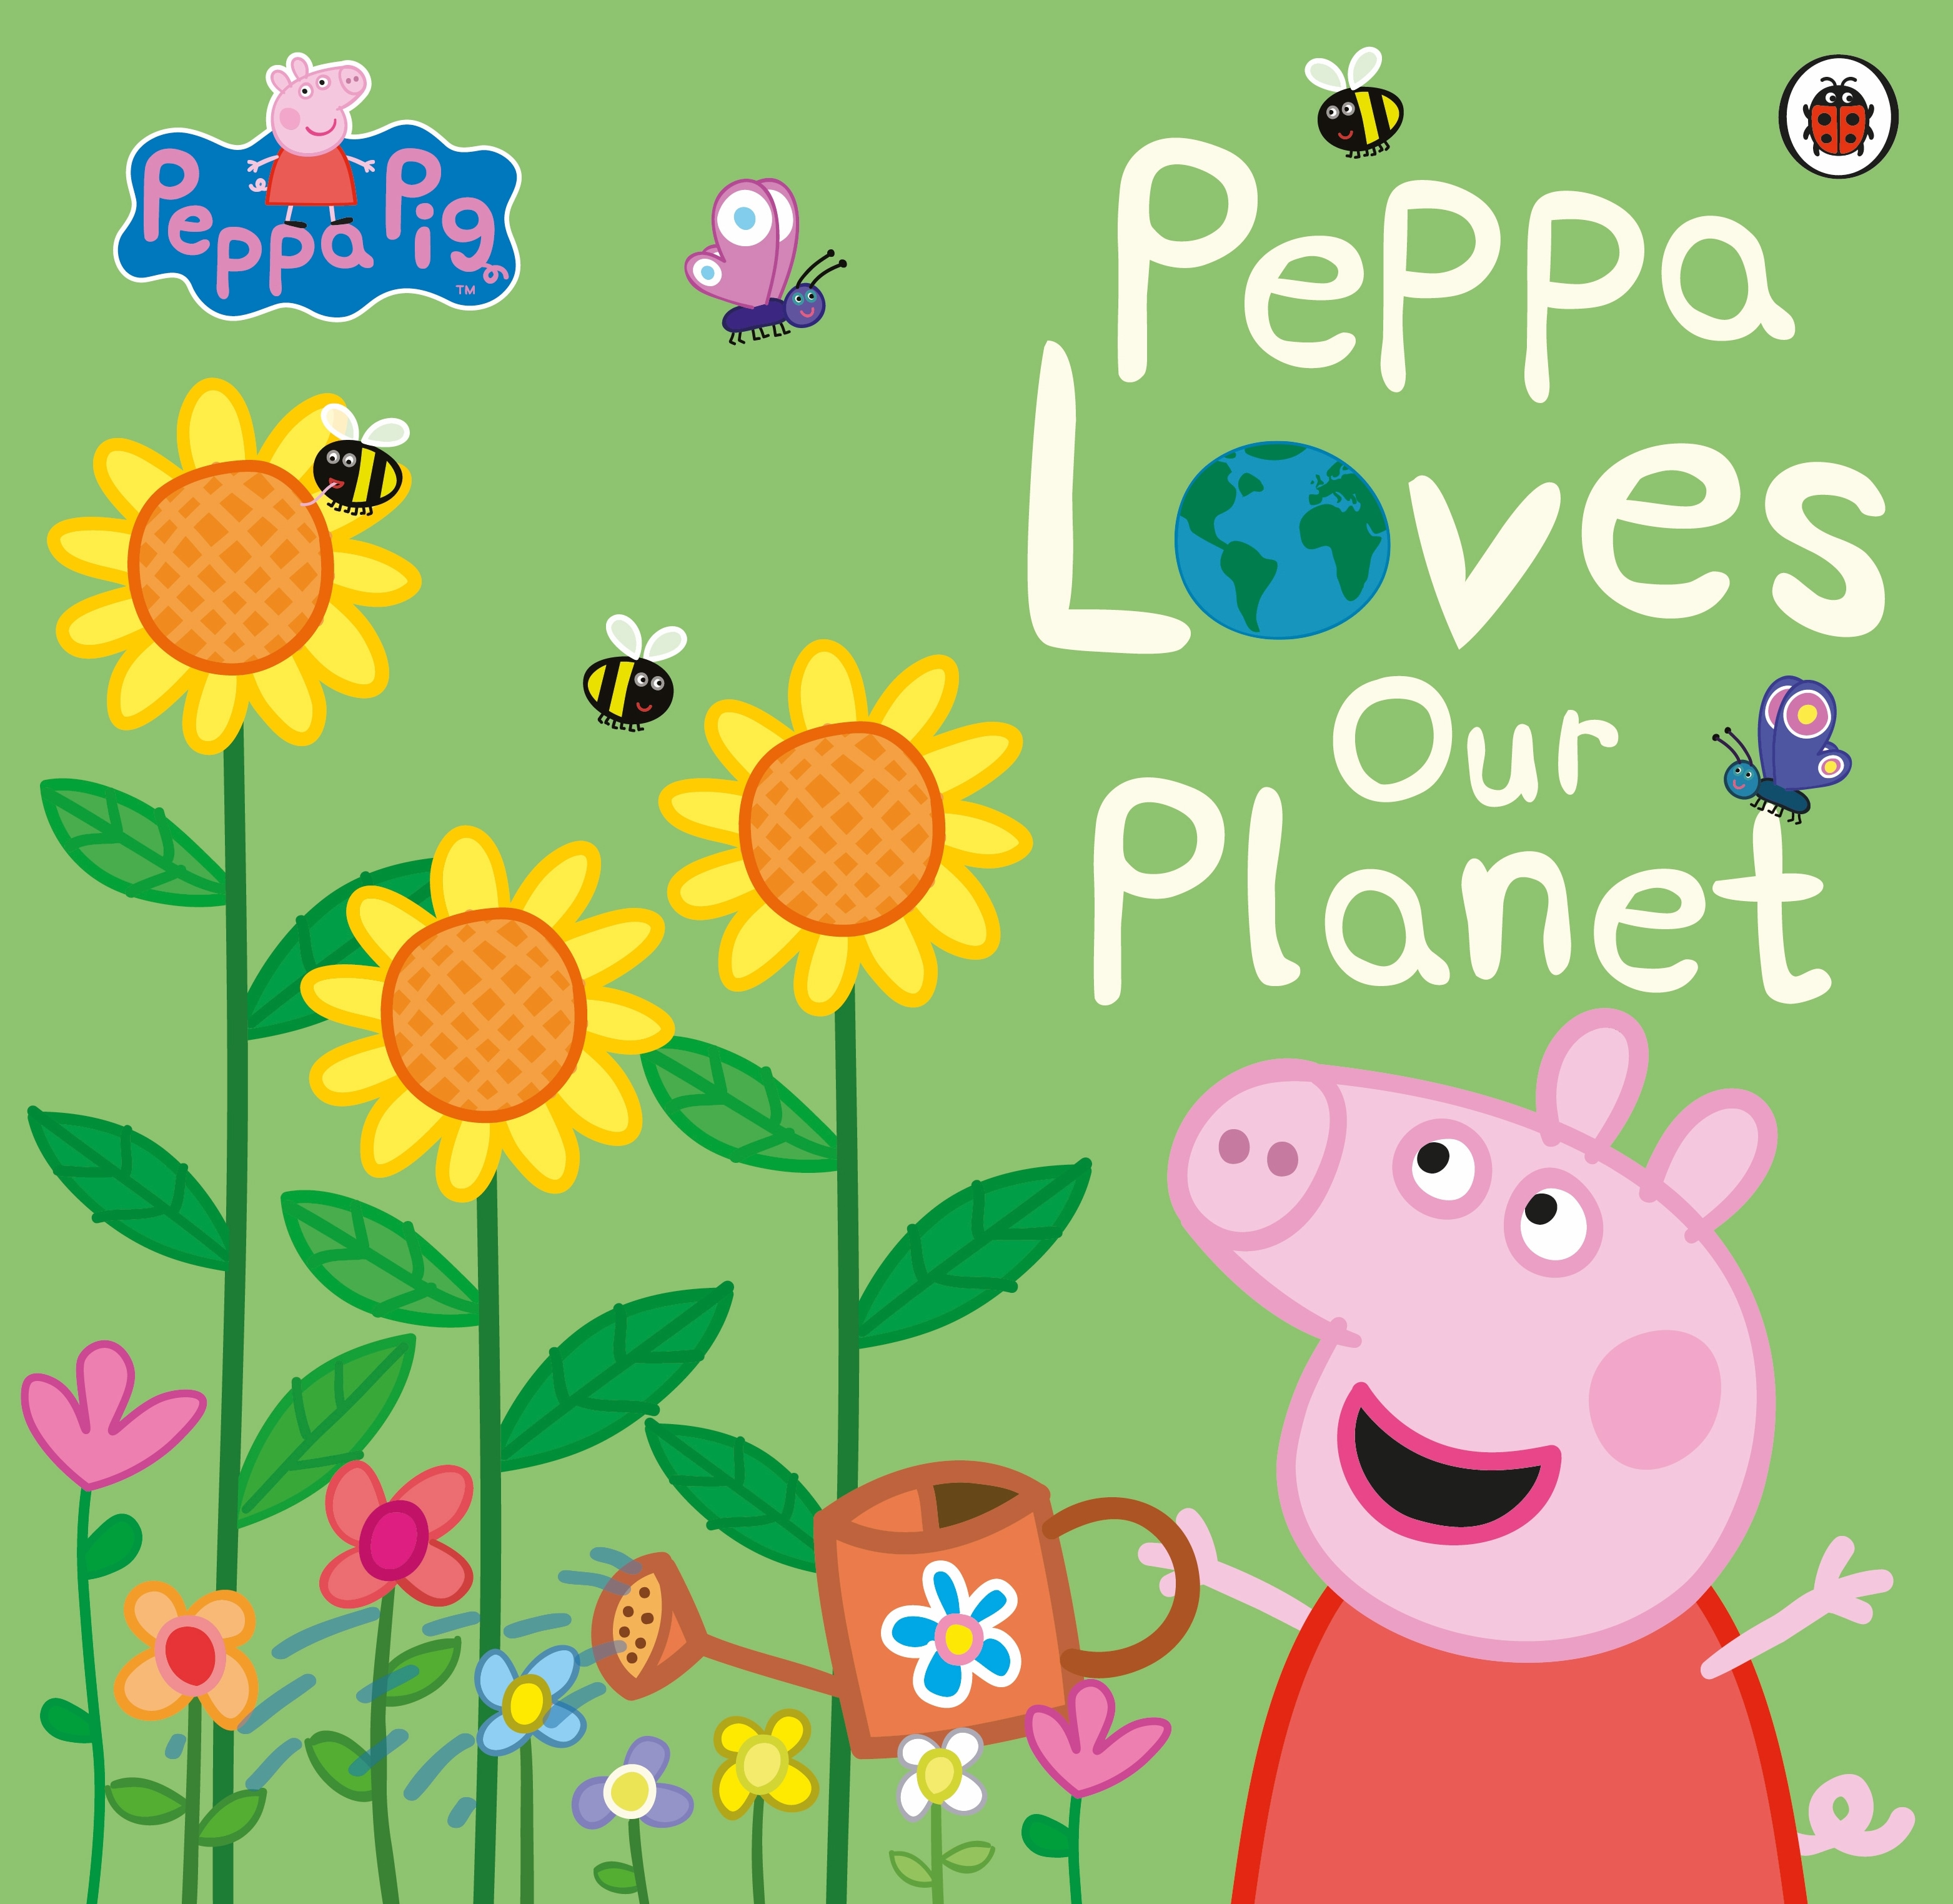 Book “Peppa Pig: Peppa Loves Our Planet” by Peppa Pig — March 19, 2020